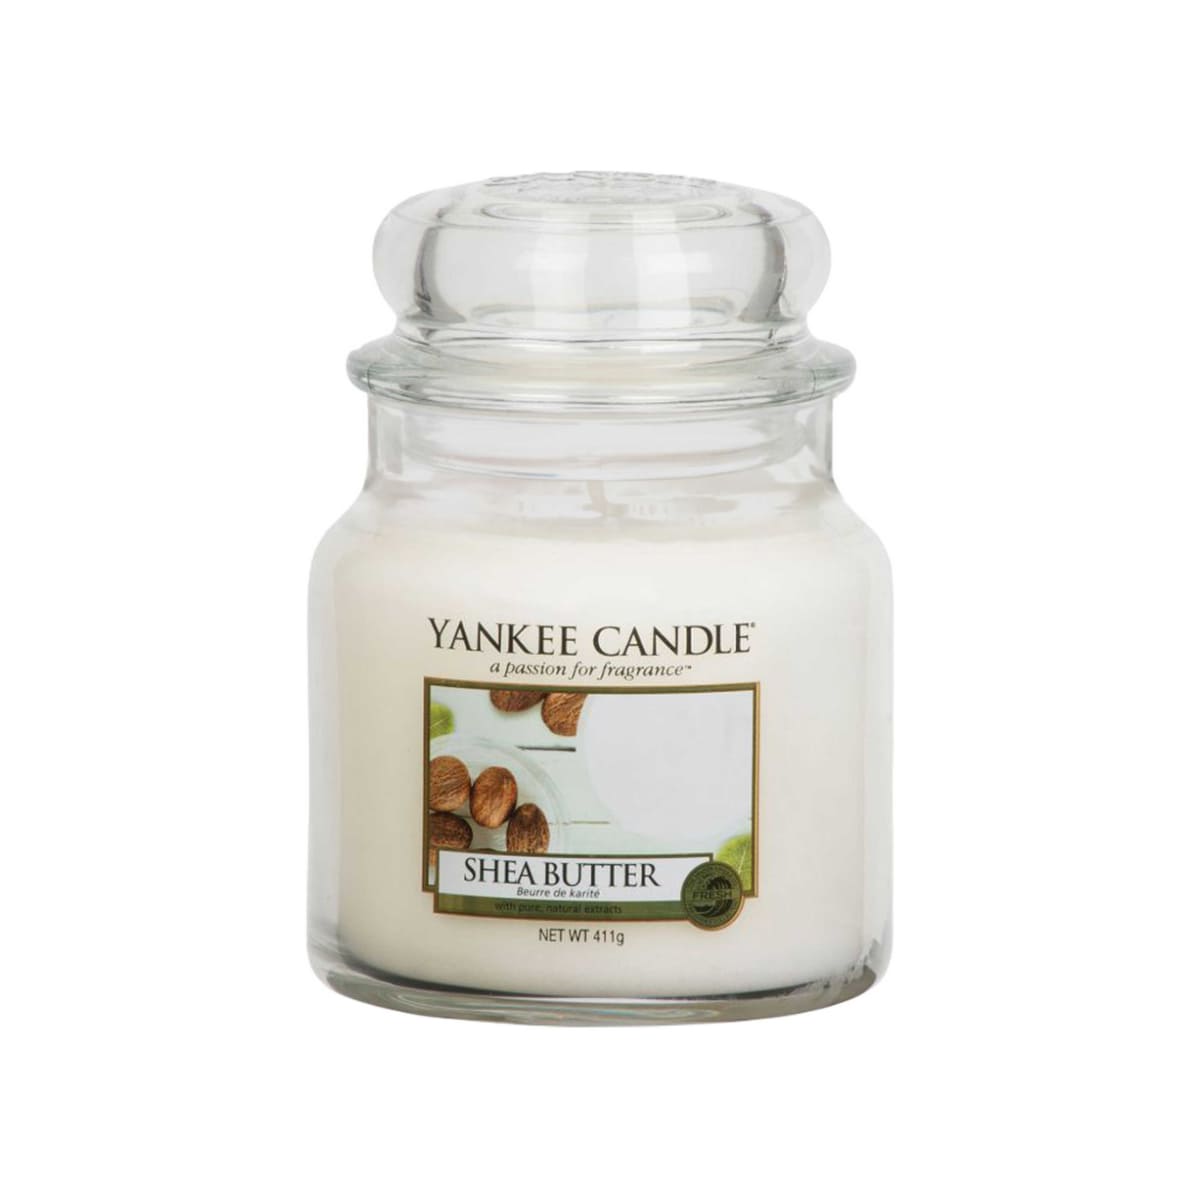 Candle Shea Butter Yankee Candle